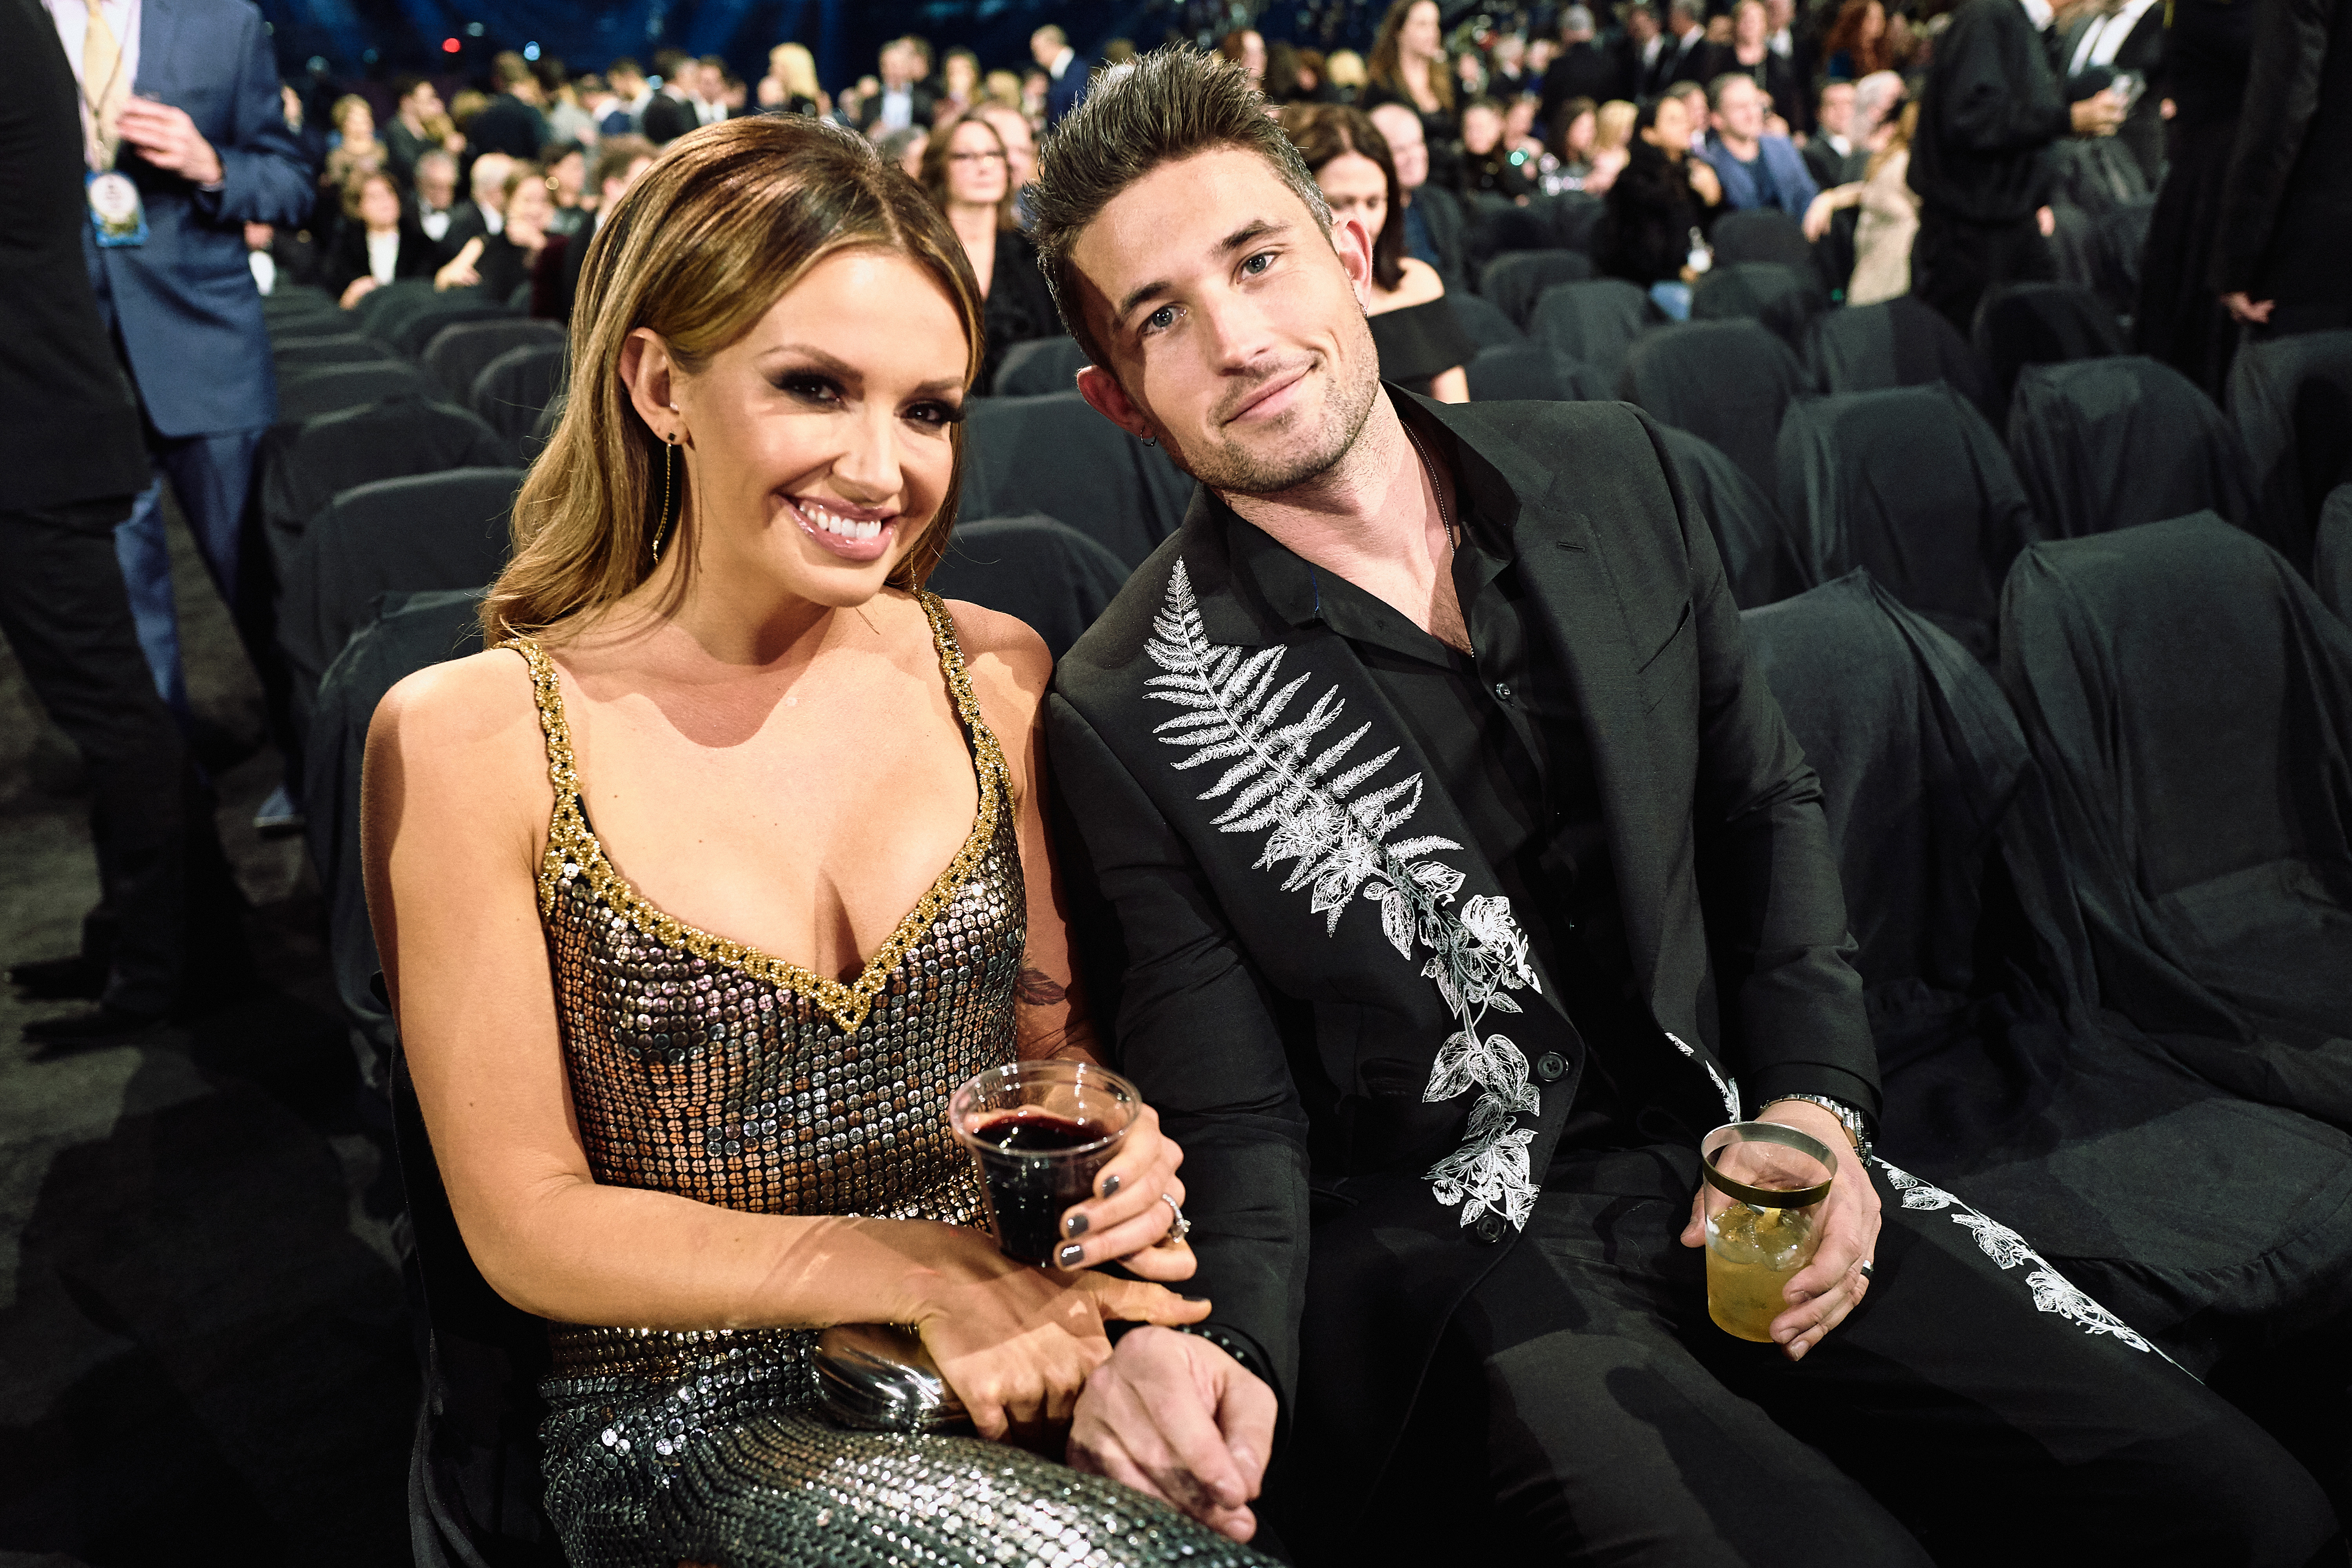 Carly Pearce and Michael Ray at the Bridgestone Arena on November 13, 2019, in Nashville, Tennessee. | Source: Getty Images